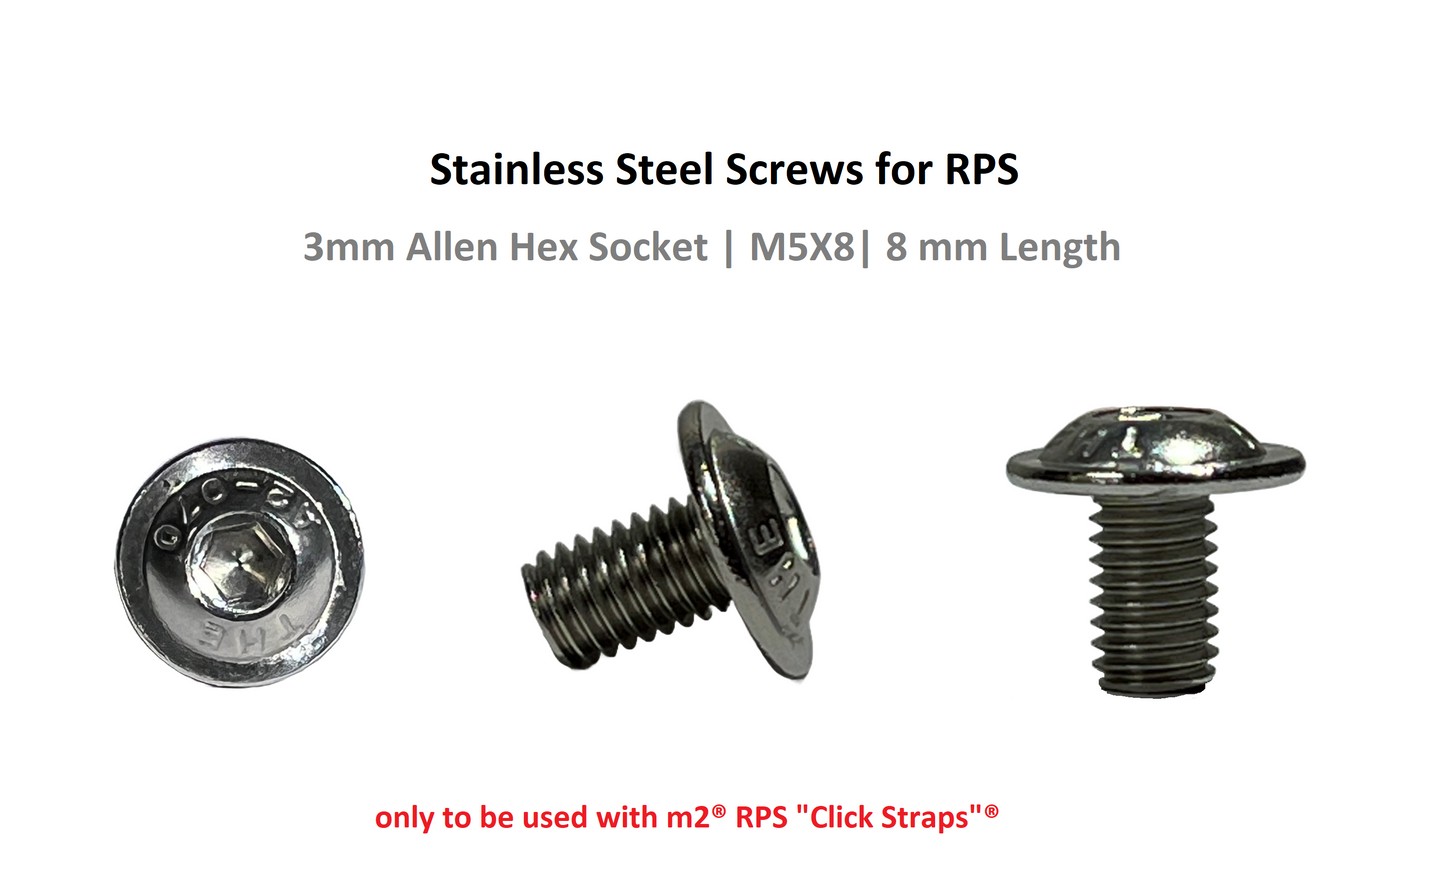 Stainless Steel Screw for RPS (25 Pack)